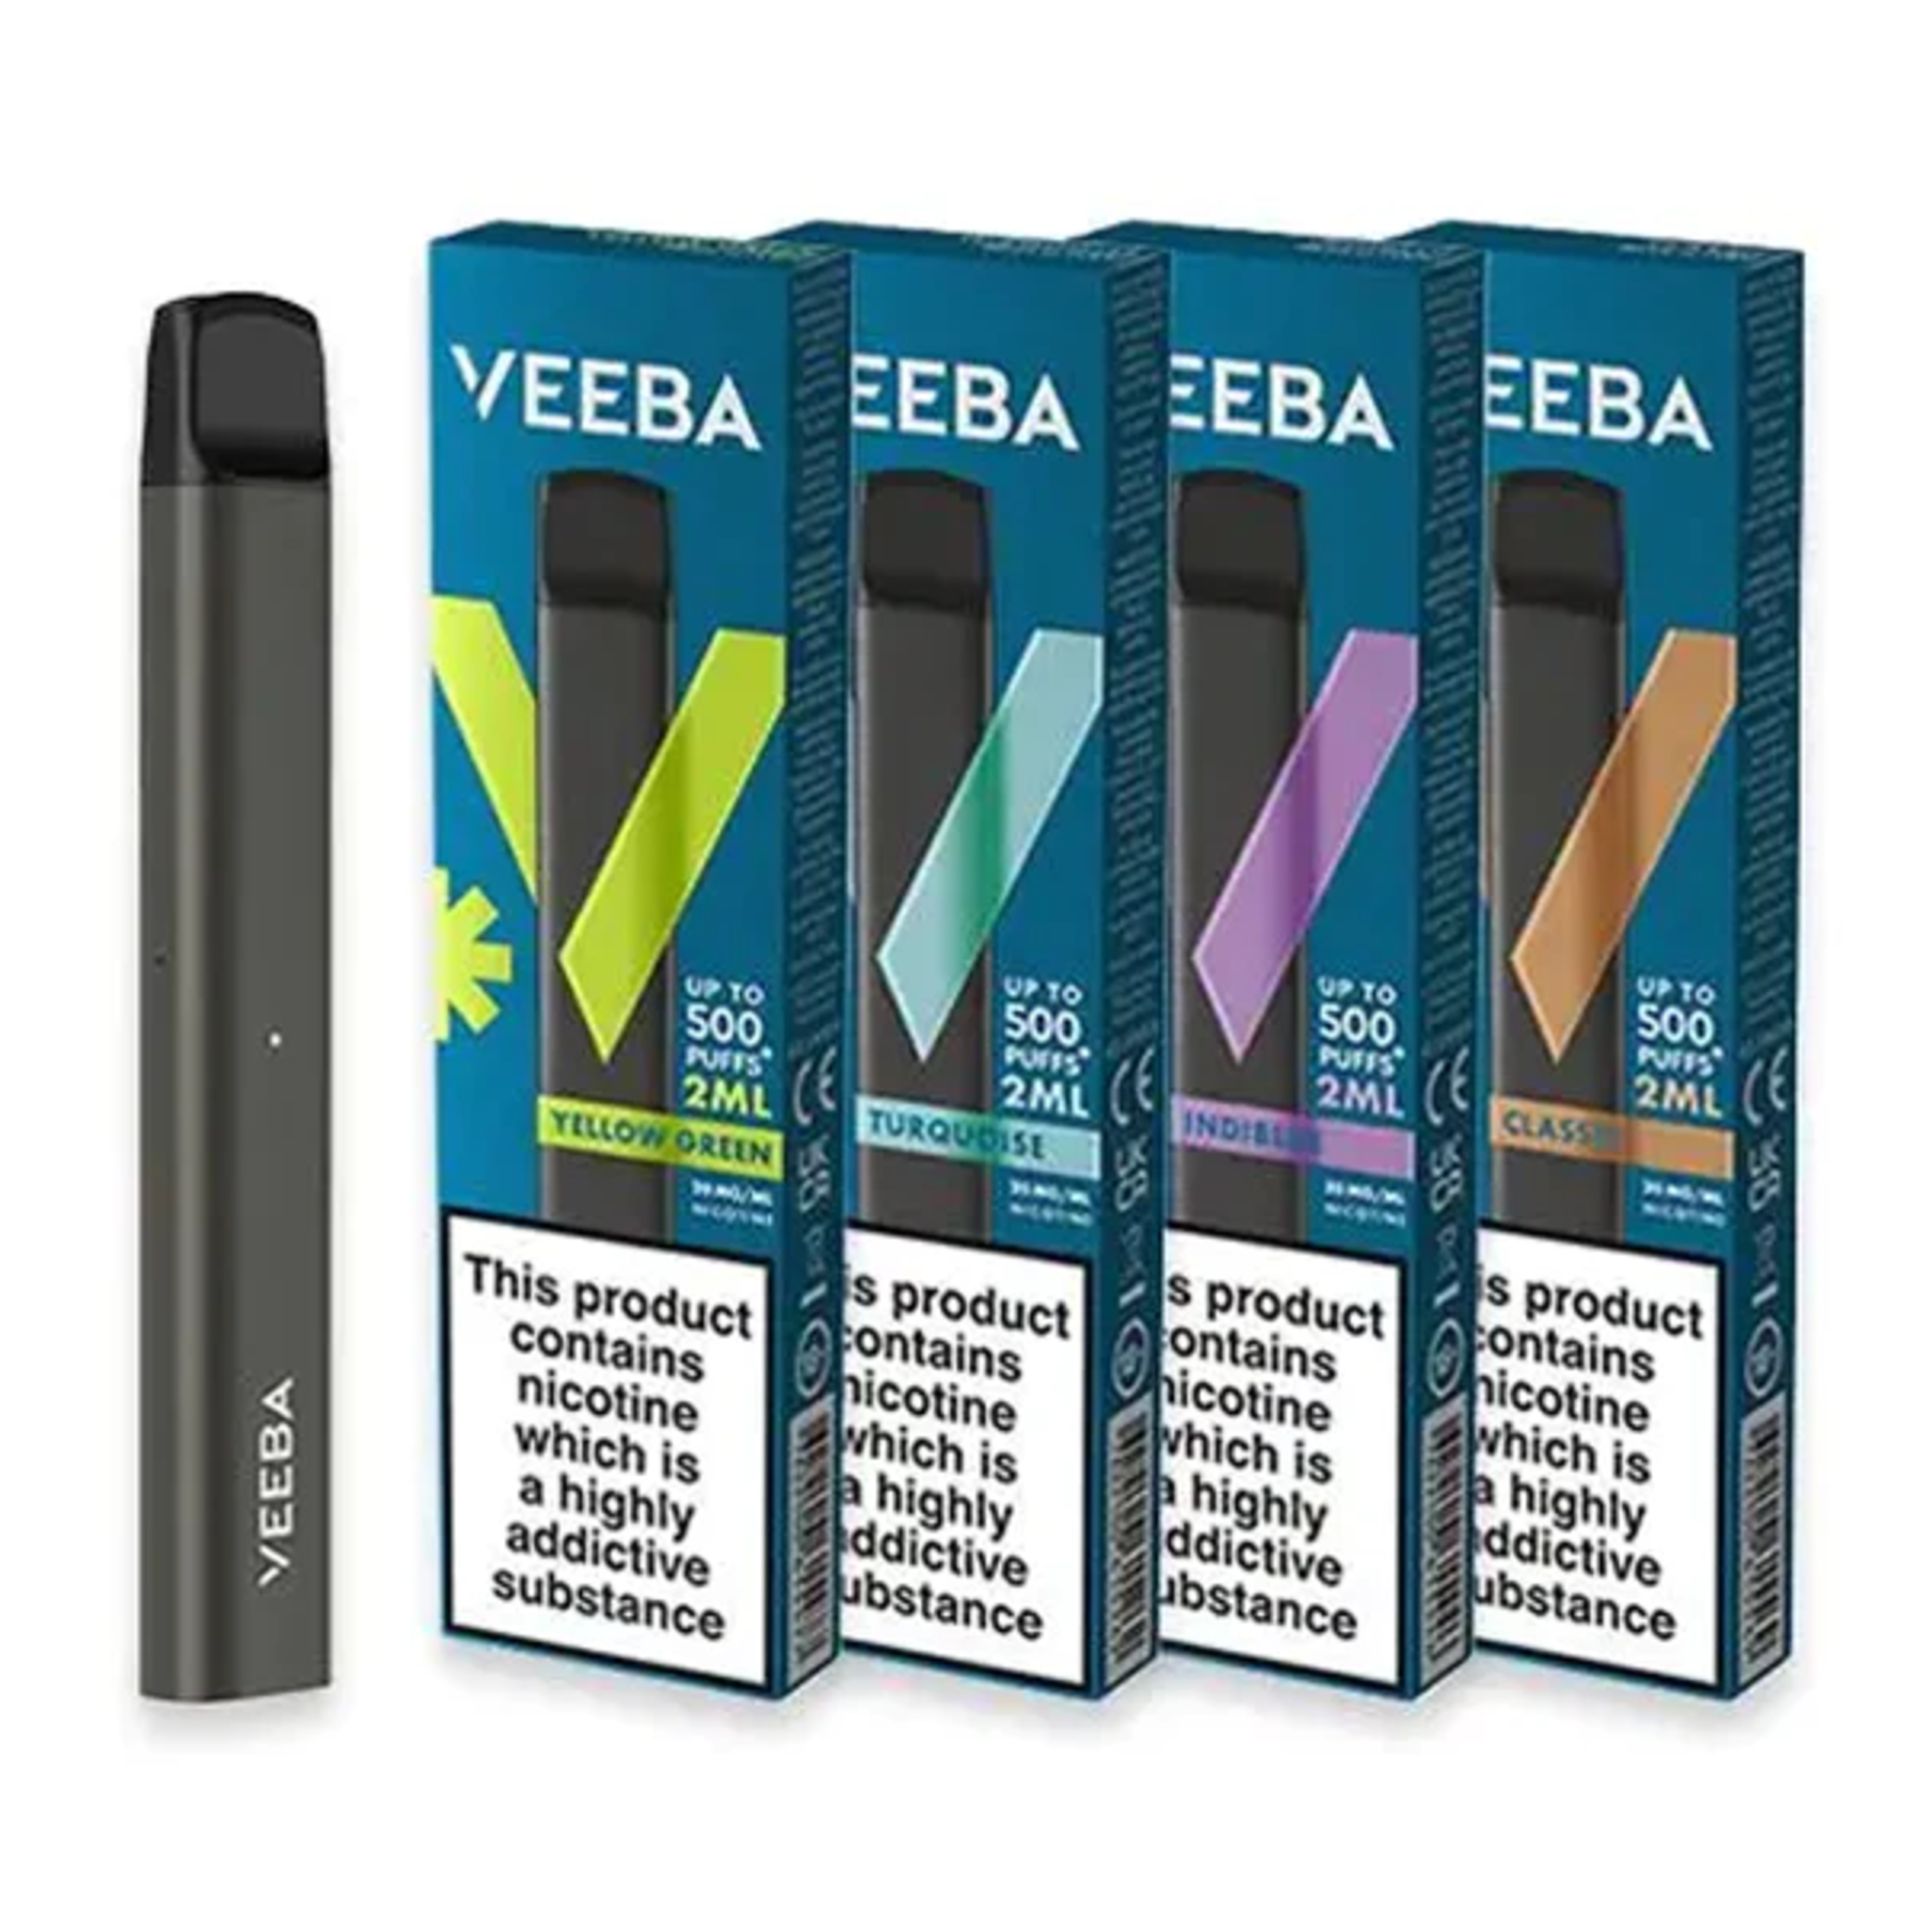 200 X VEEBA DISPOSABLE 500 PUFF VAPE PENS - MIX OF 4 FLAVOURS - EXP OCT 2024 - OVER 18 ONLY!